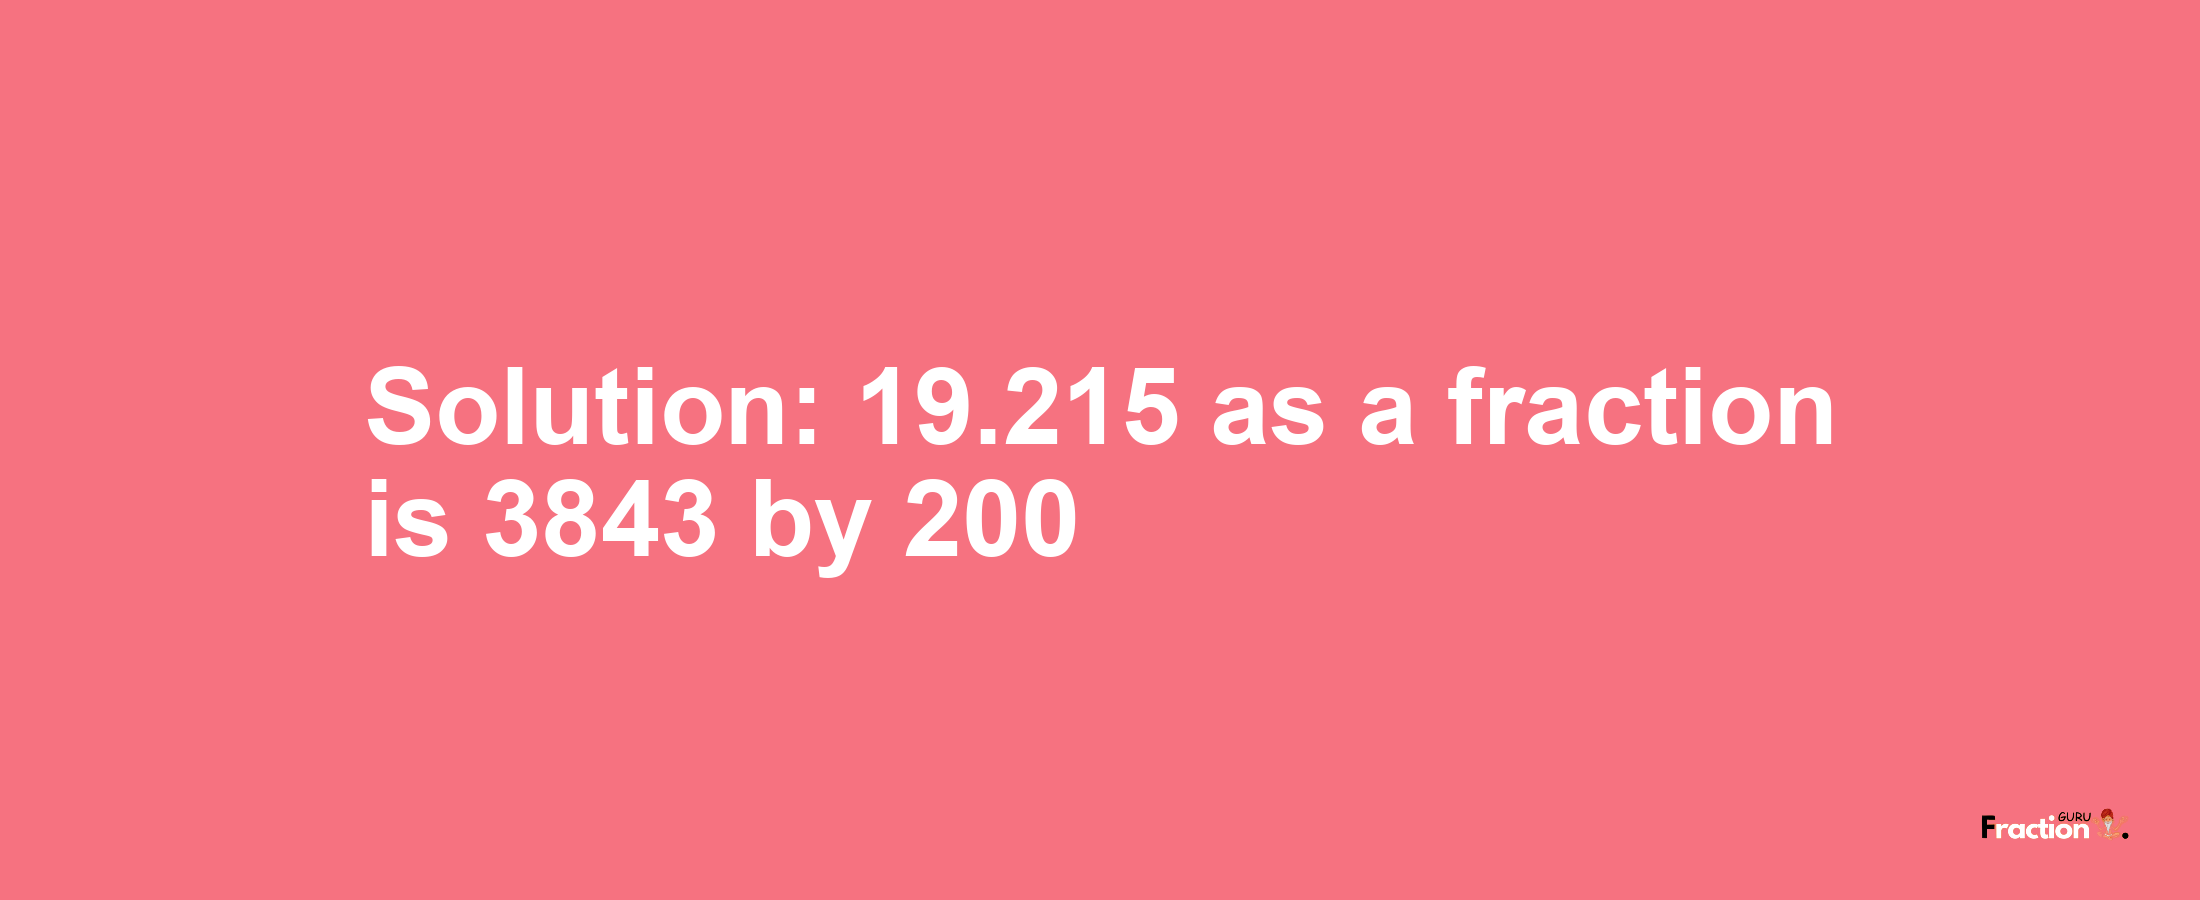 Solution:19.215 as a fraction is 3843/200